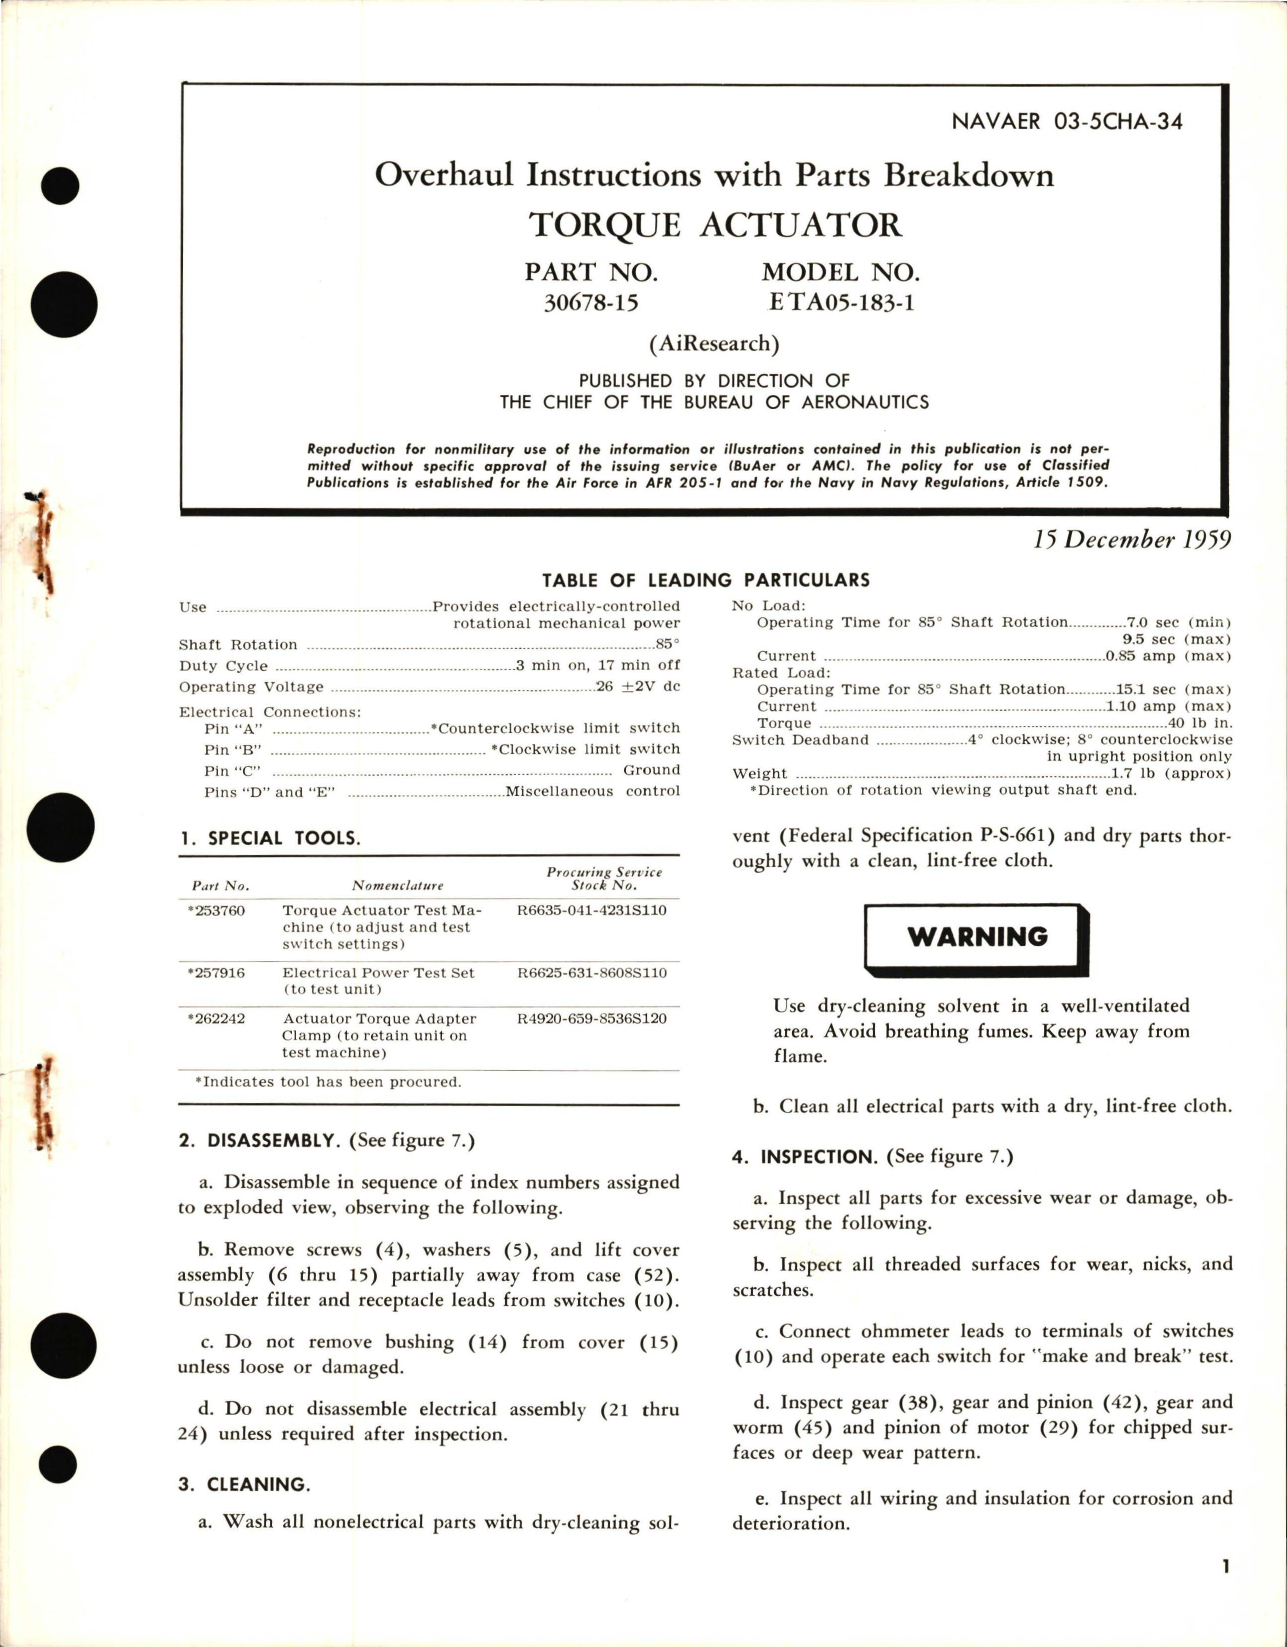 Sample page 1 from AirCorps Library document: Overhaul Instructions with Parts Breakdown for Torque Actuator - Part 30678-15 